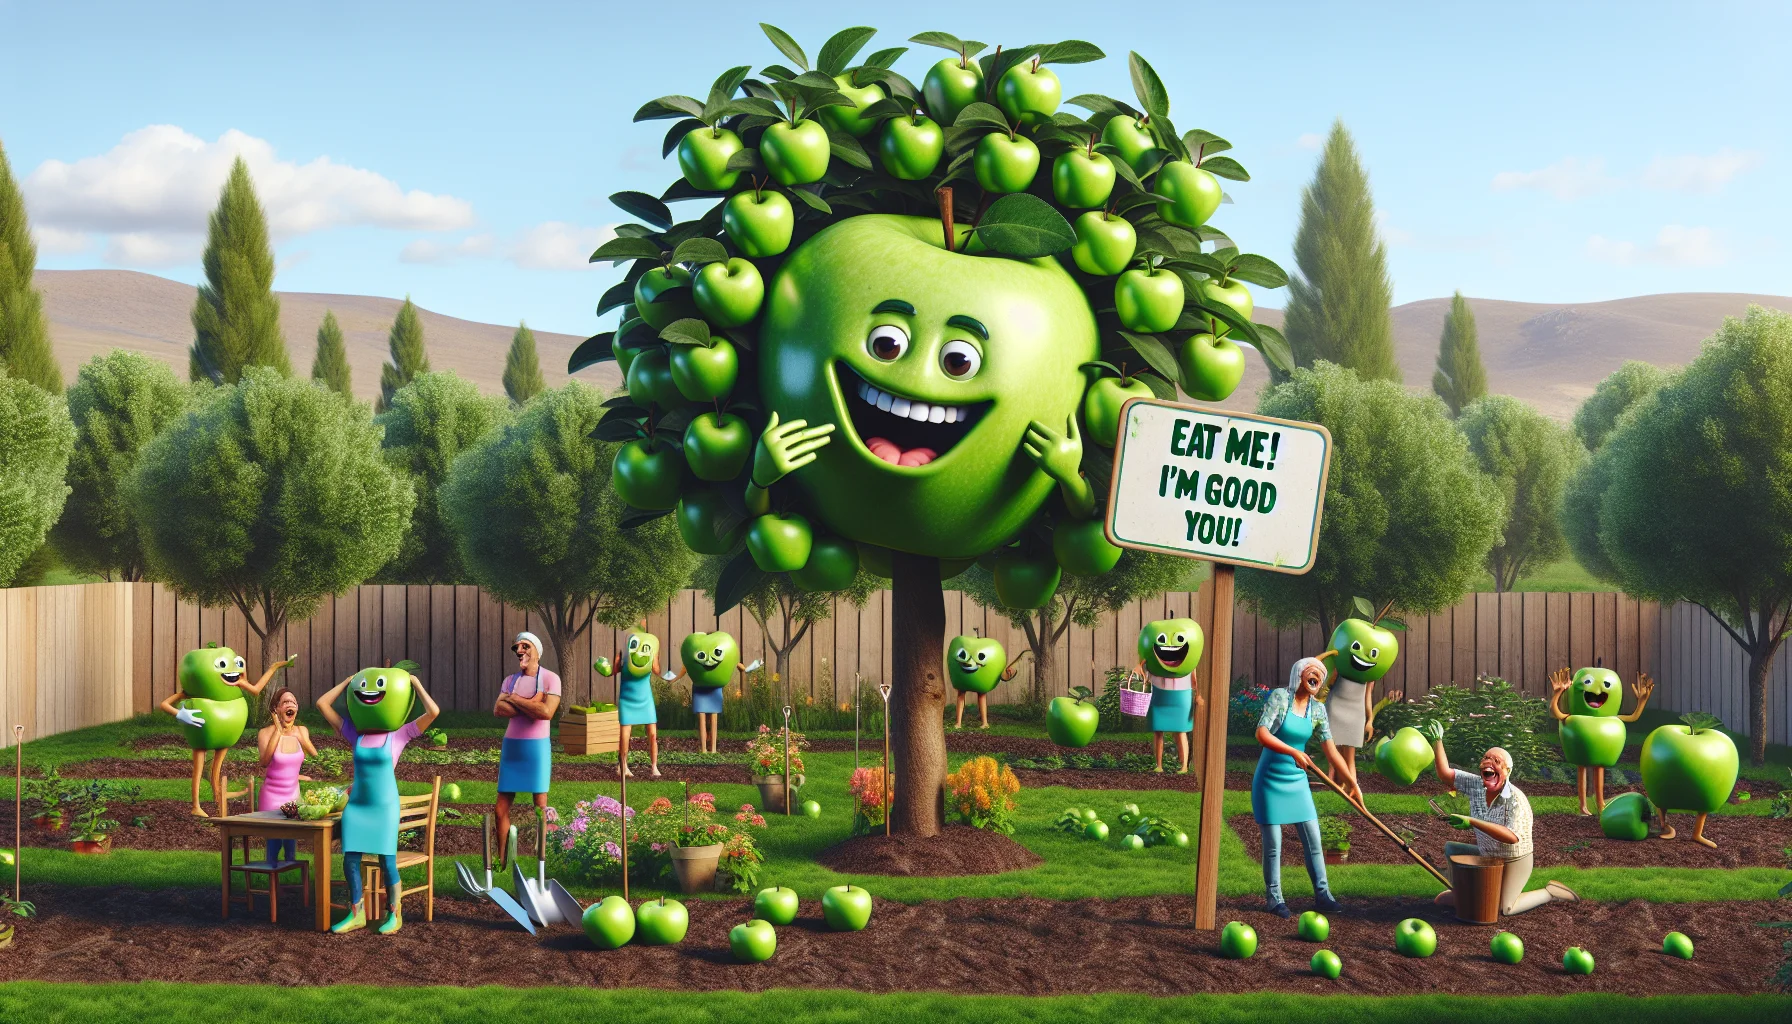 Generate a realistic image illustrating the benefits of green apples in a comical manner. Showcase an amusement-filled scene in a garden where individuals of various descents and genders are joyfully involved in gardening activities, alongside cheekily grinning green apple trees. The apple trees are playfully throwing fruits upwards, suggesting they want humans to eat them. Beside the tree, include a humorous sign saying 'Eat Me! I'm Good for You!' highlighting that green apples are good for health.